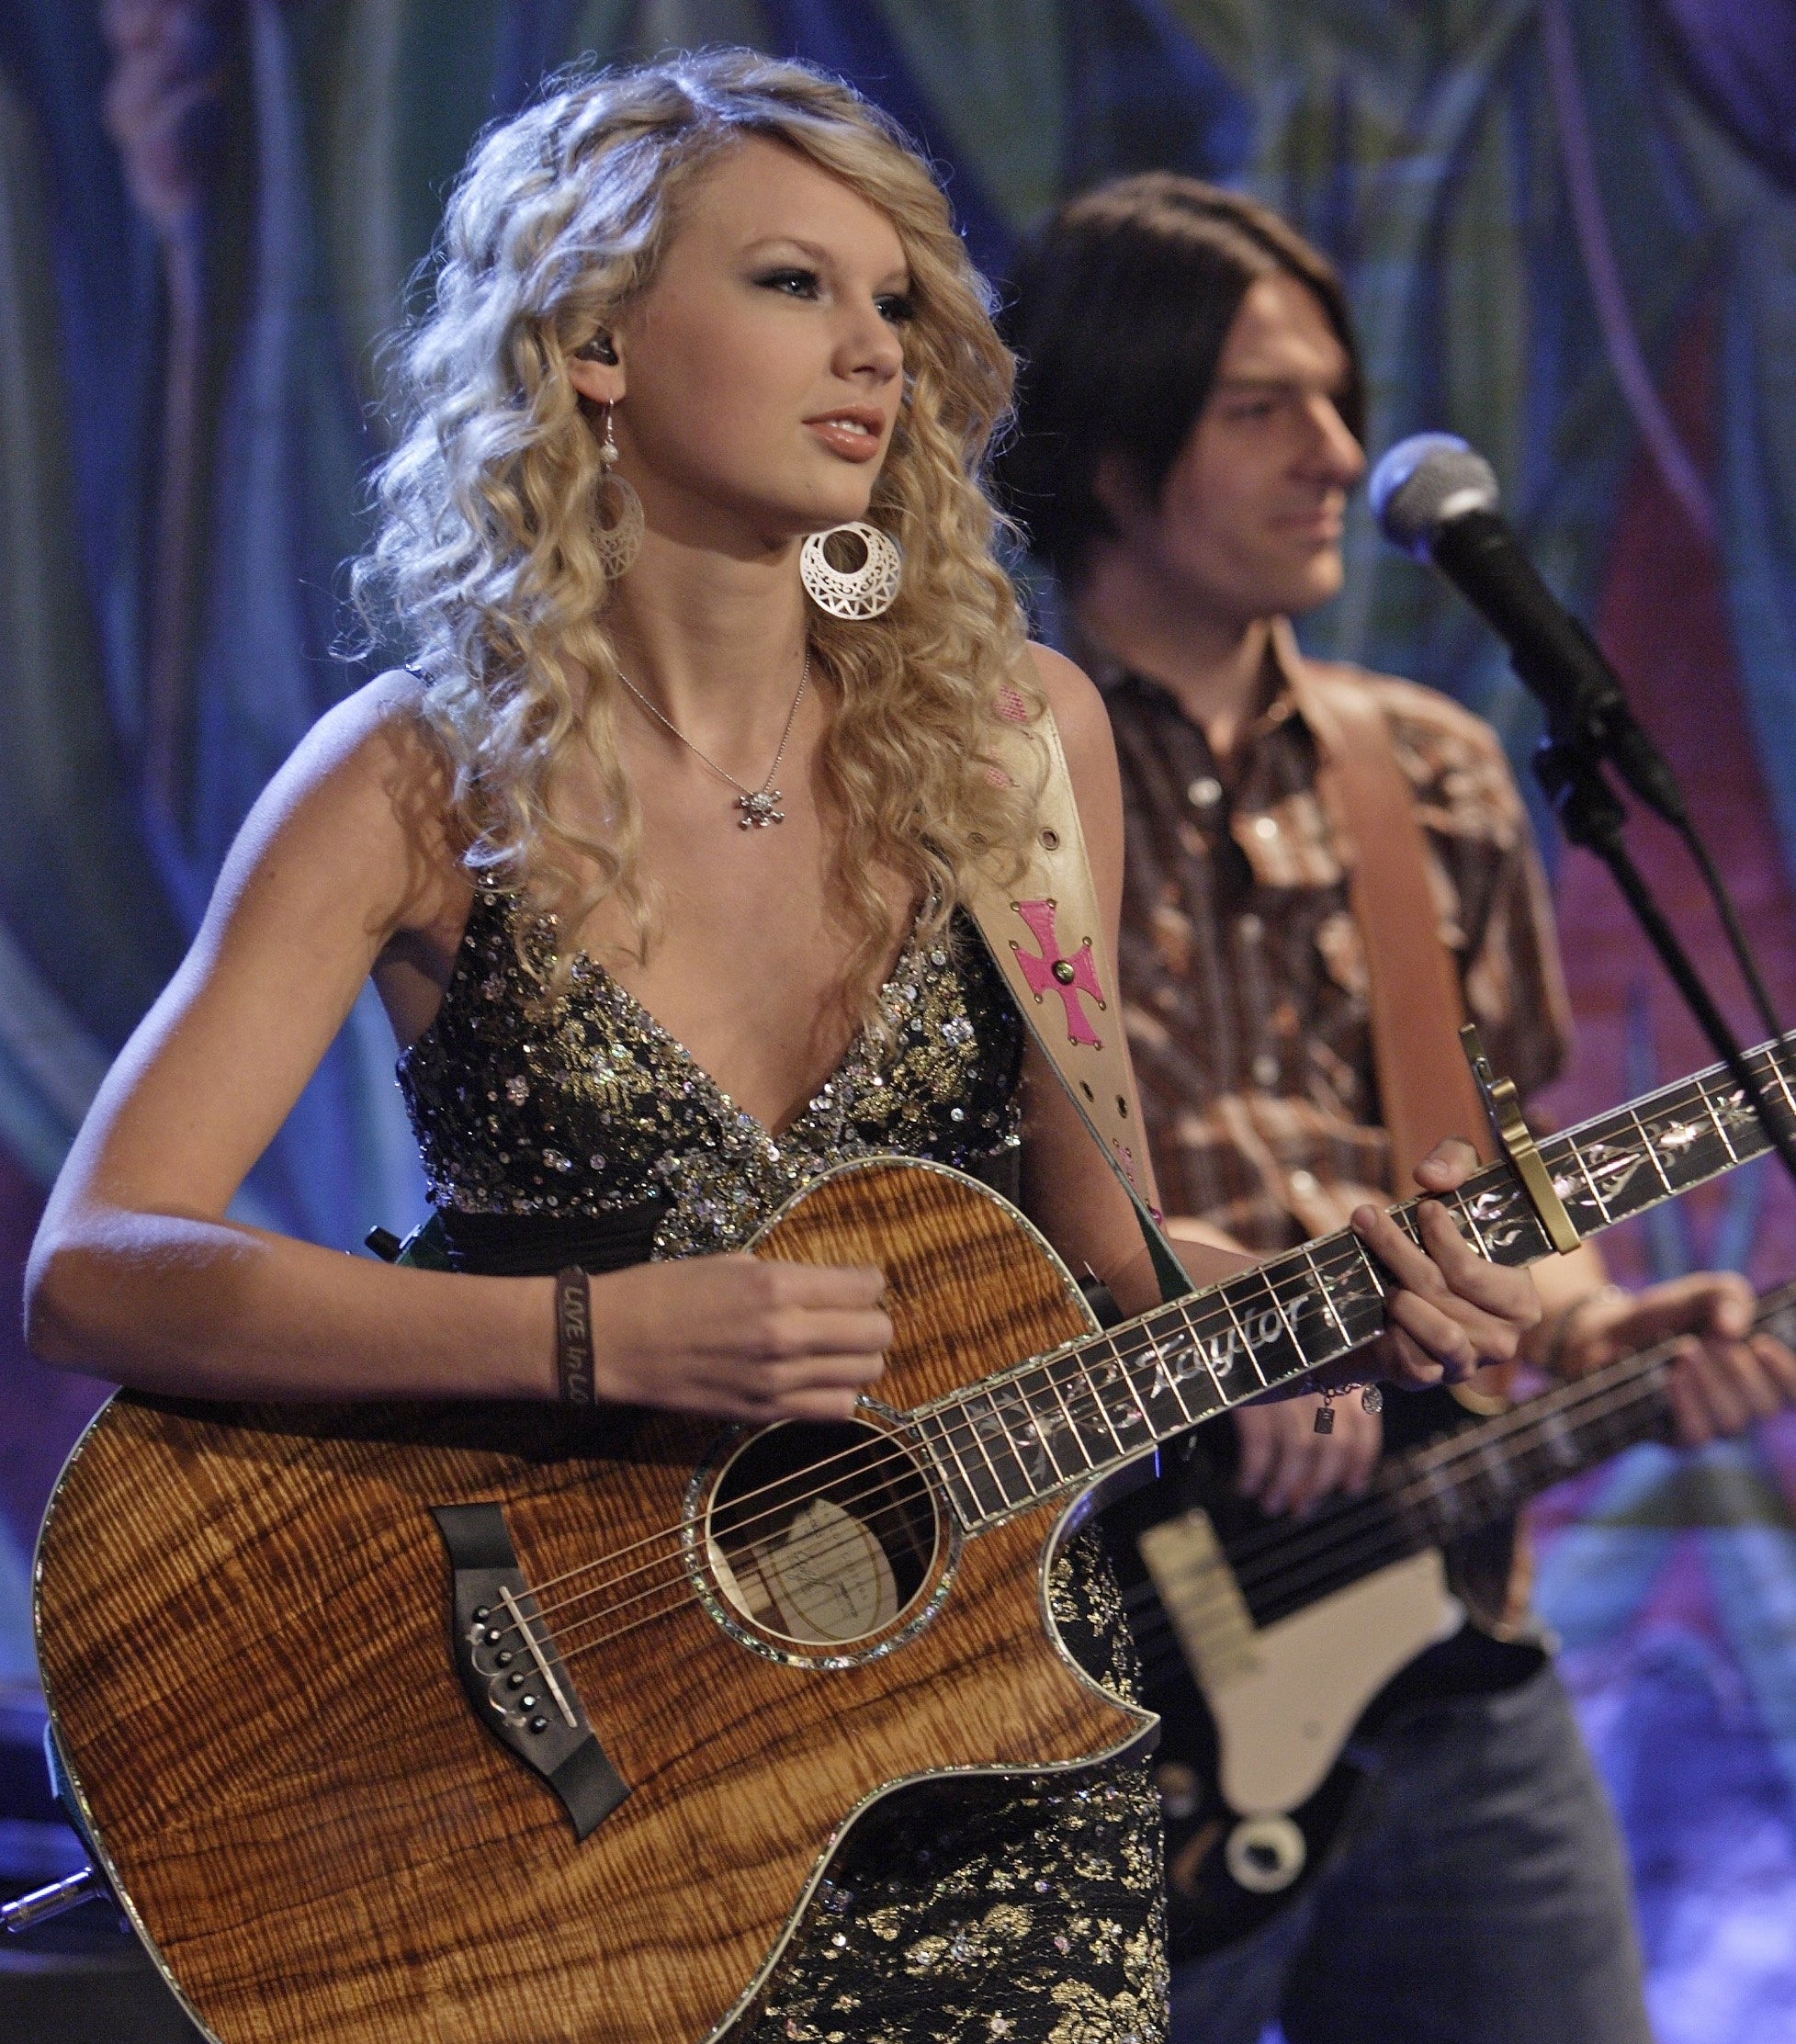 Taylor Swift performing with a guitar, wearing a sparkly black dress, accompanied by a male guitarist